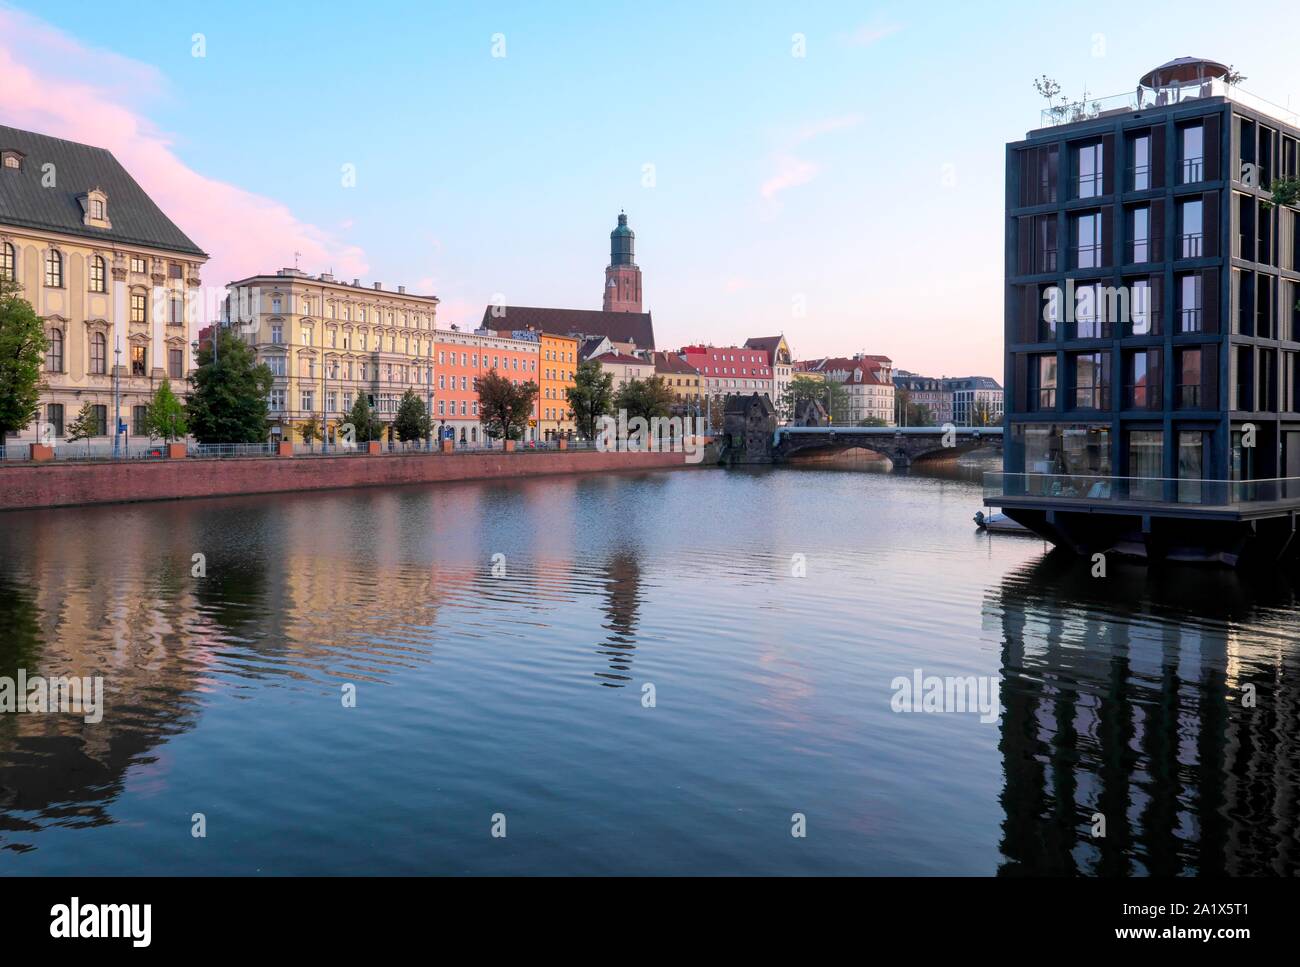 Evening atmosphere on the Oder River, Elisabeth Church in the background, Wroclaw, Poland Stock Photo